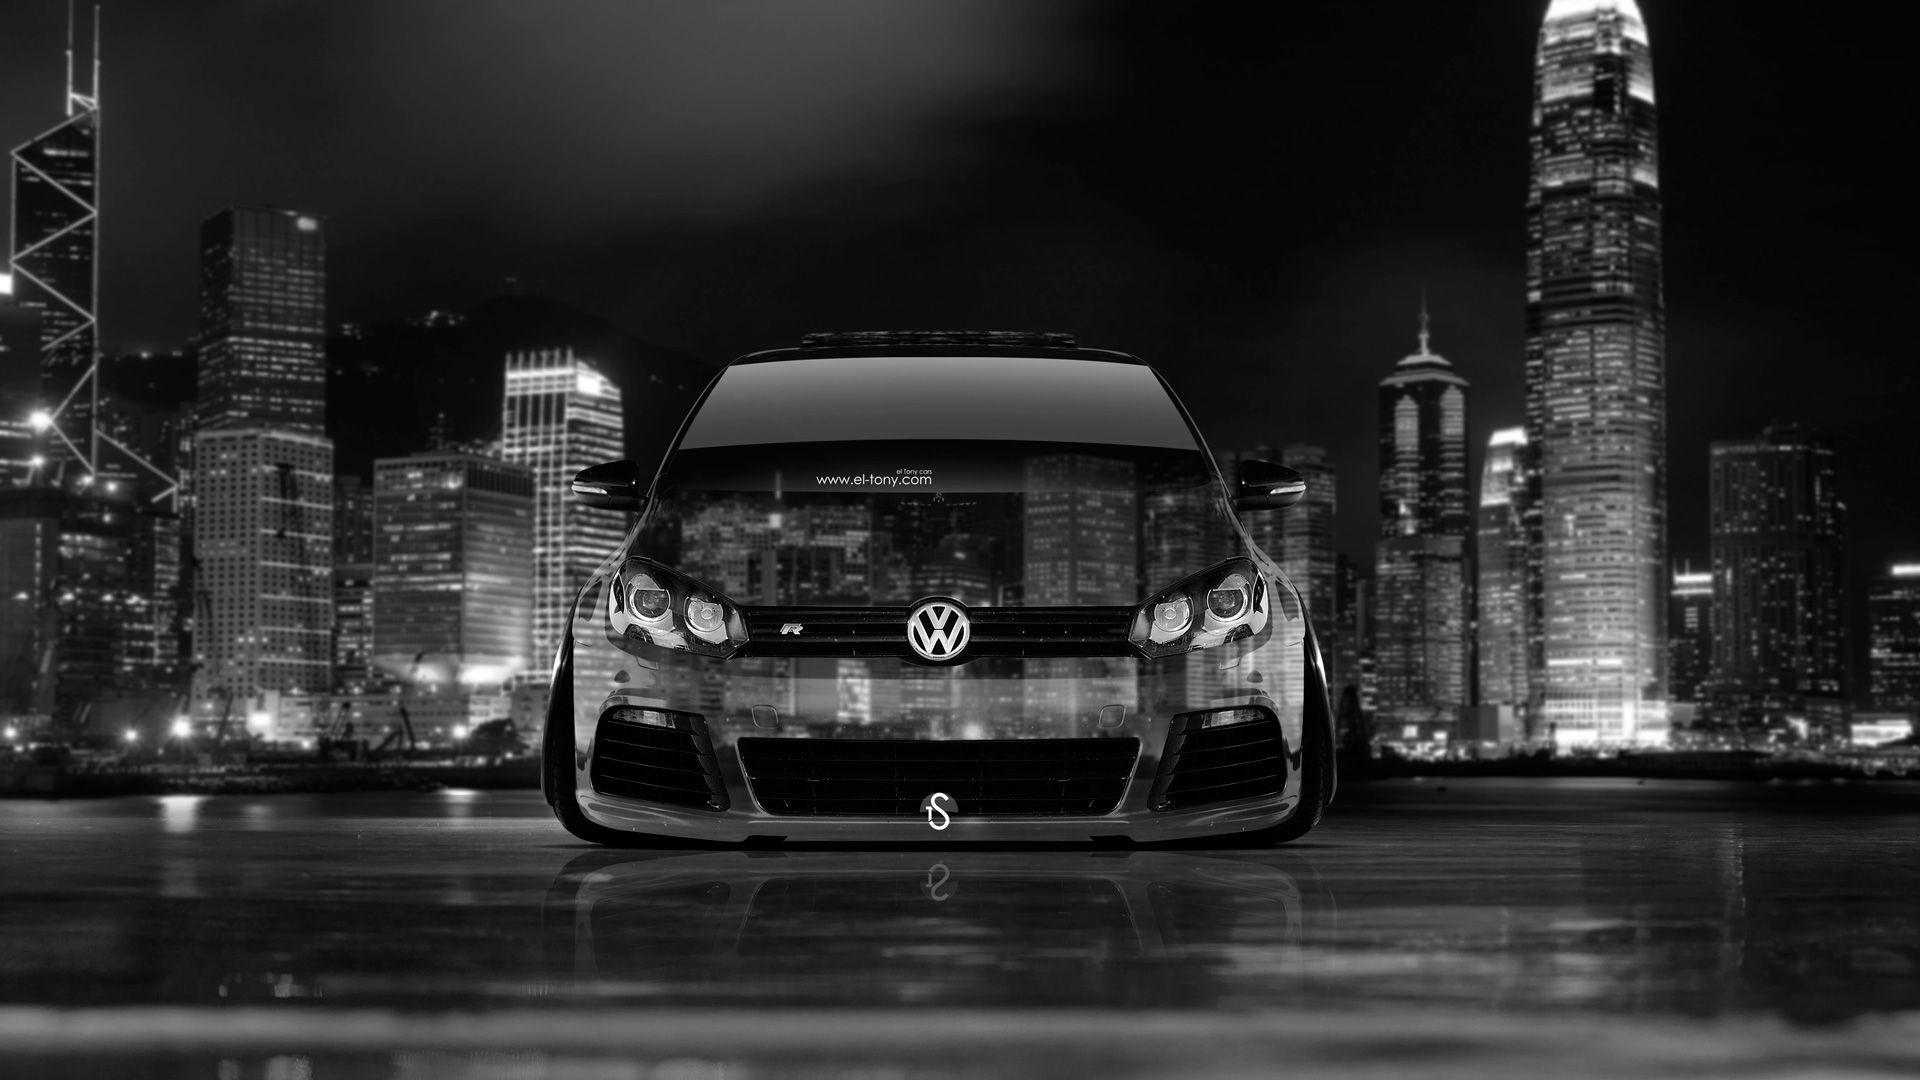 Volkswagen Golf R Car Wallpaper reflect your style in rich fashion